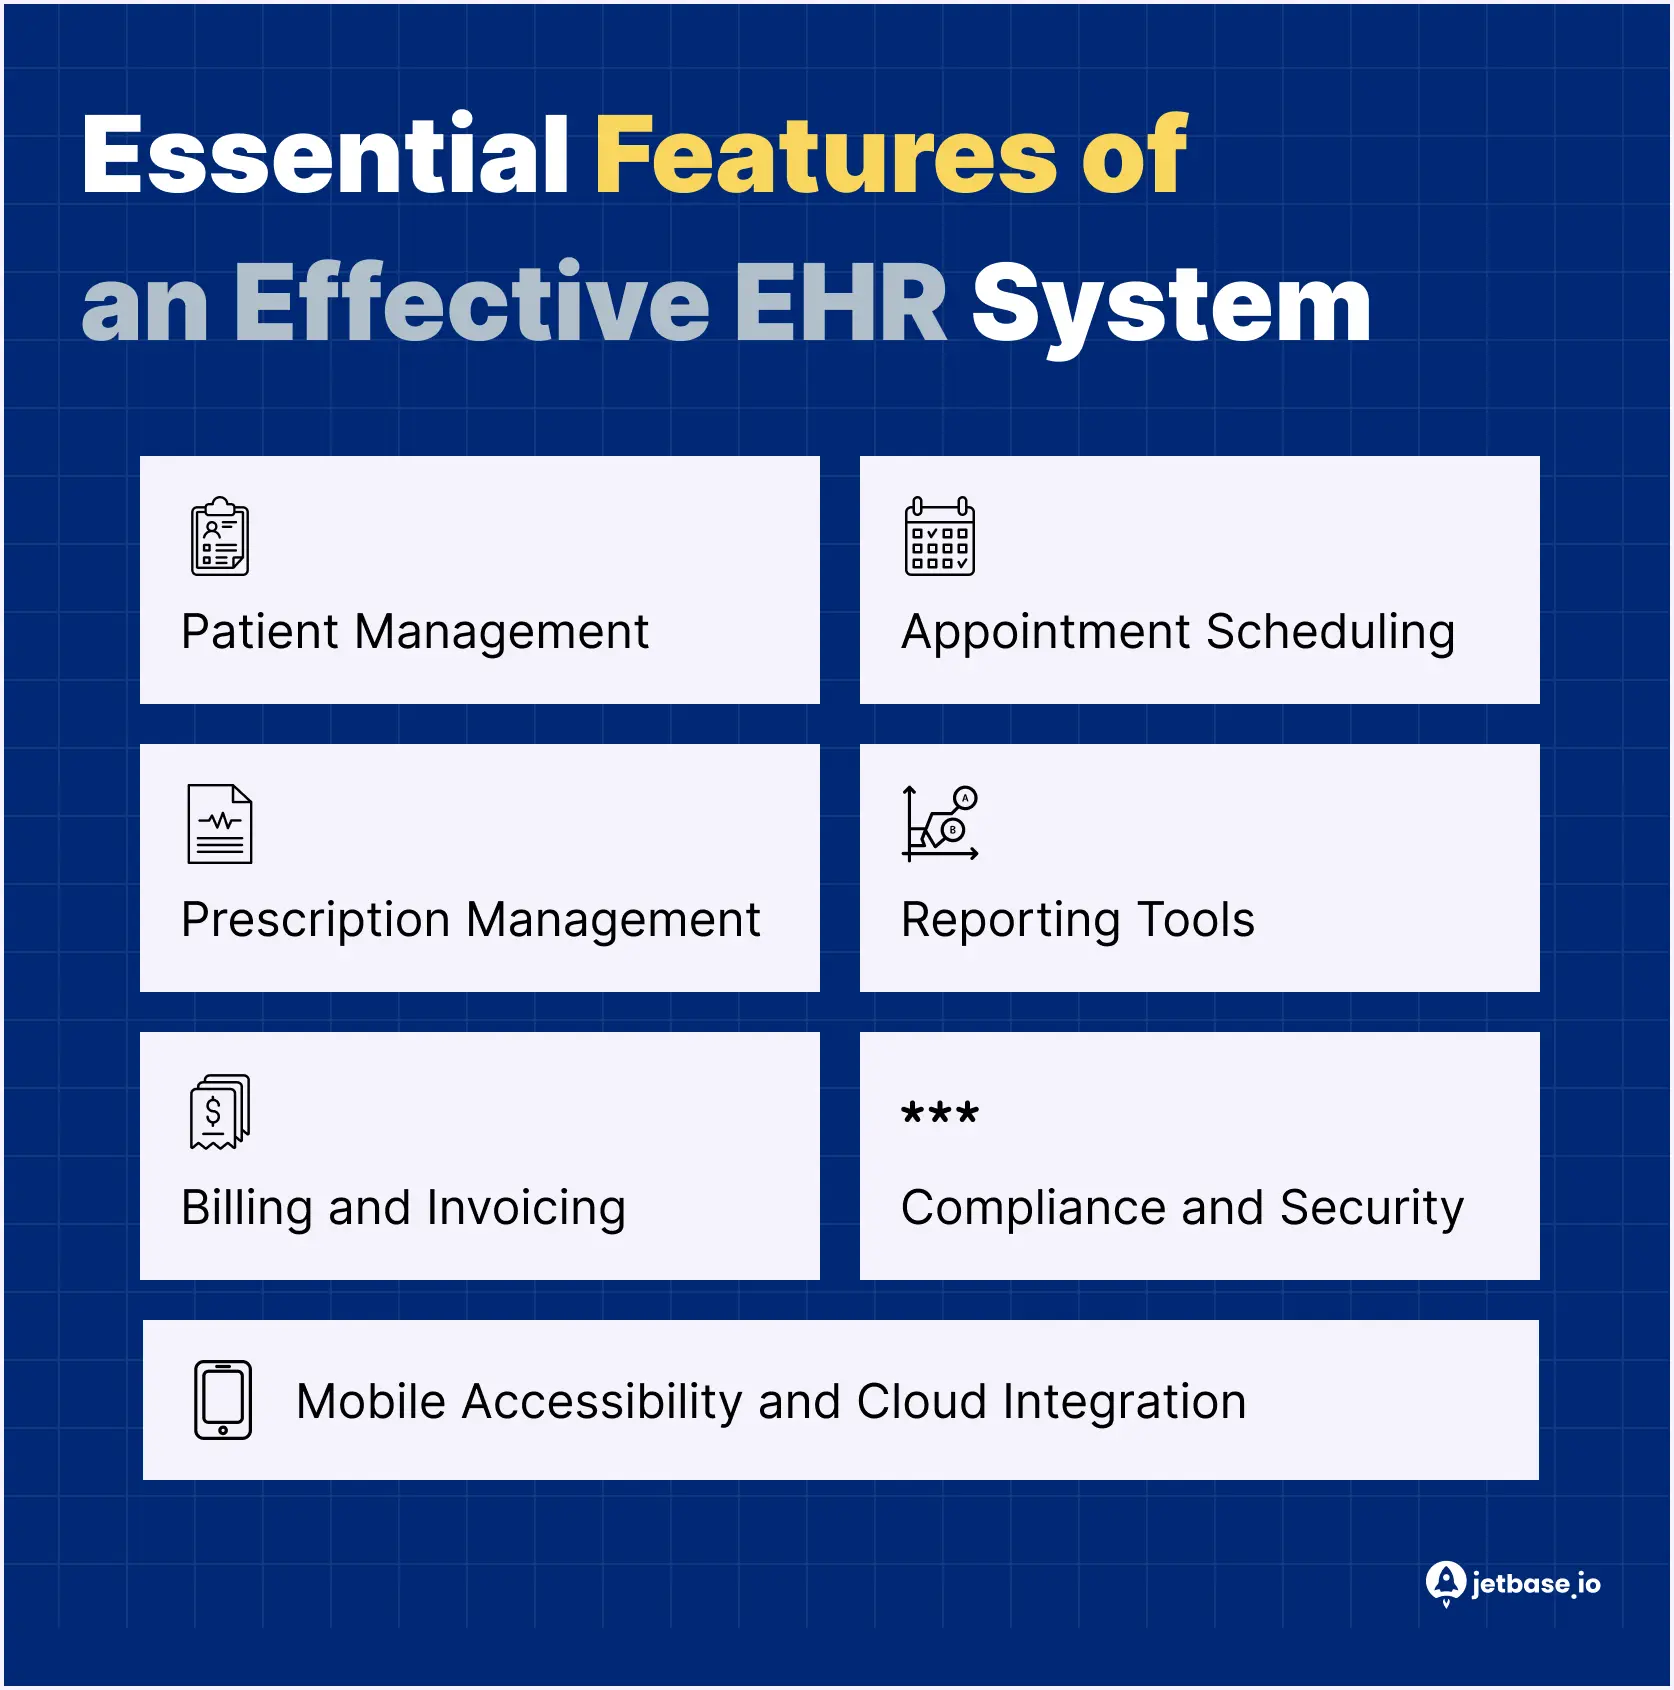 Essential Features of an Effective EHR System.webp